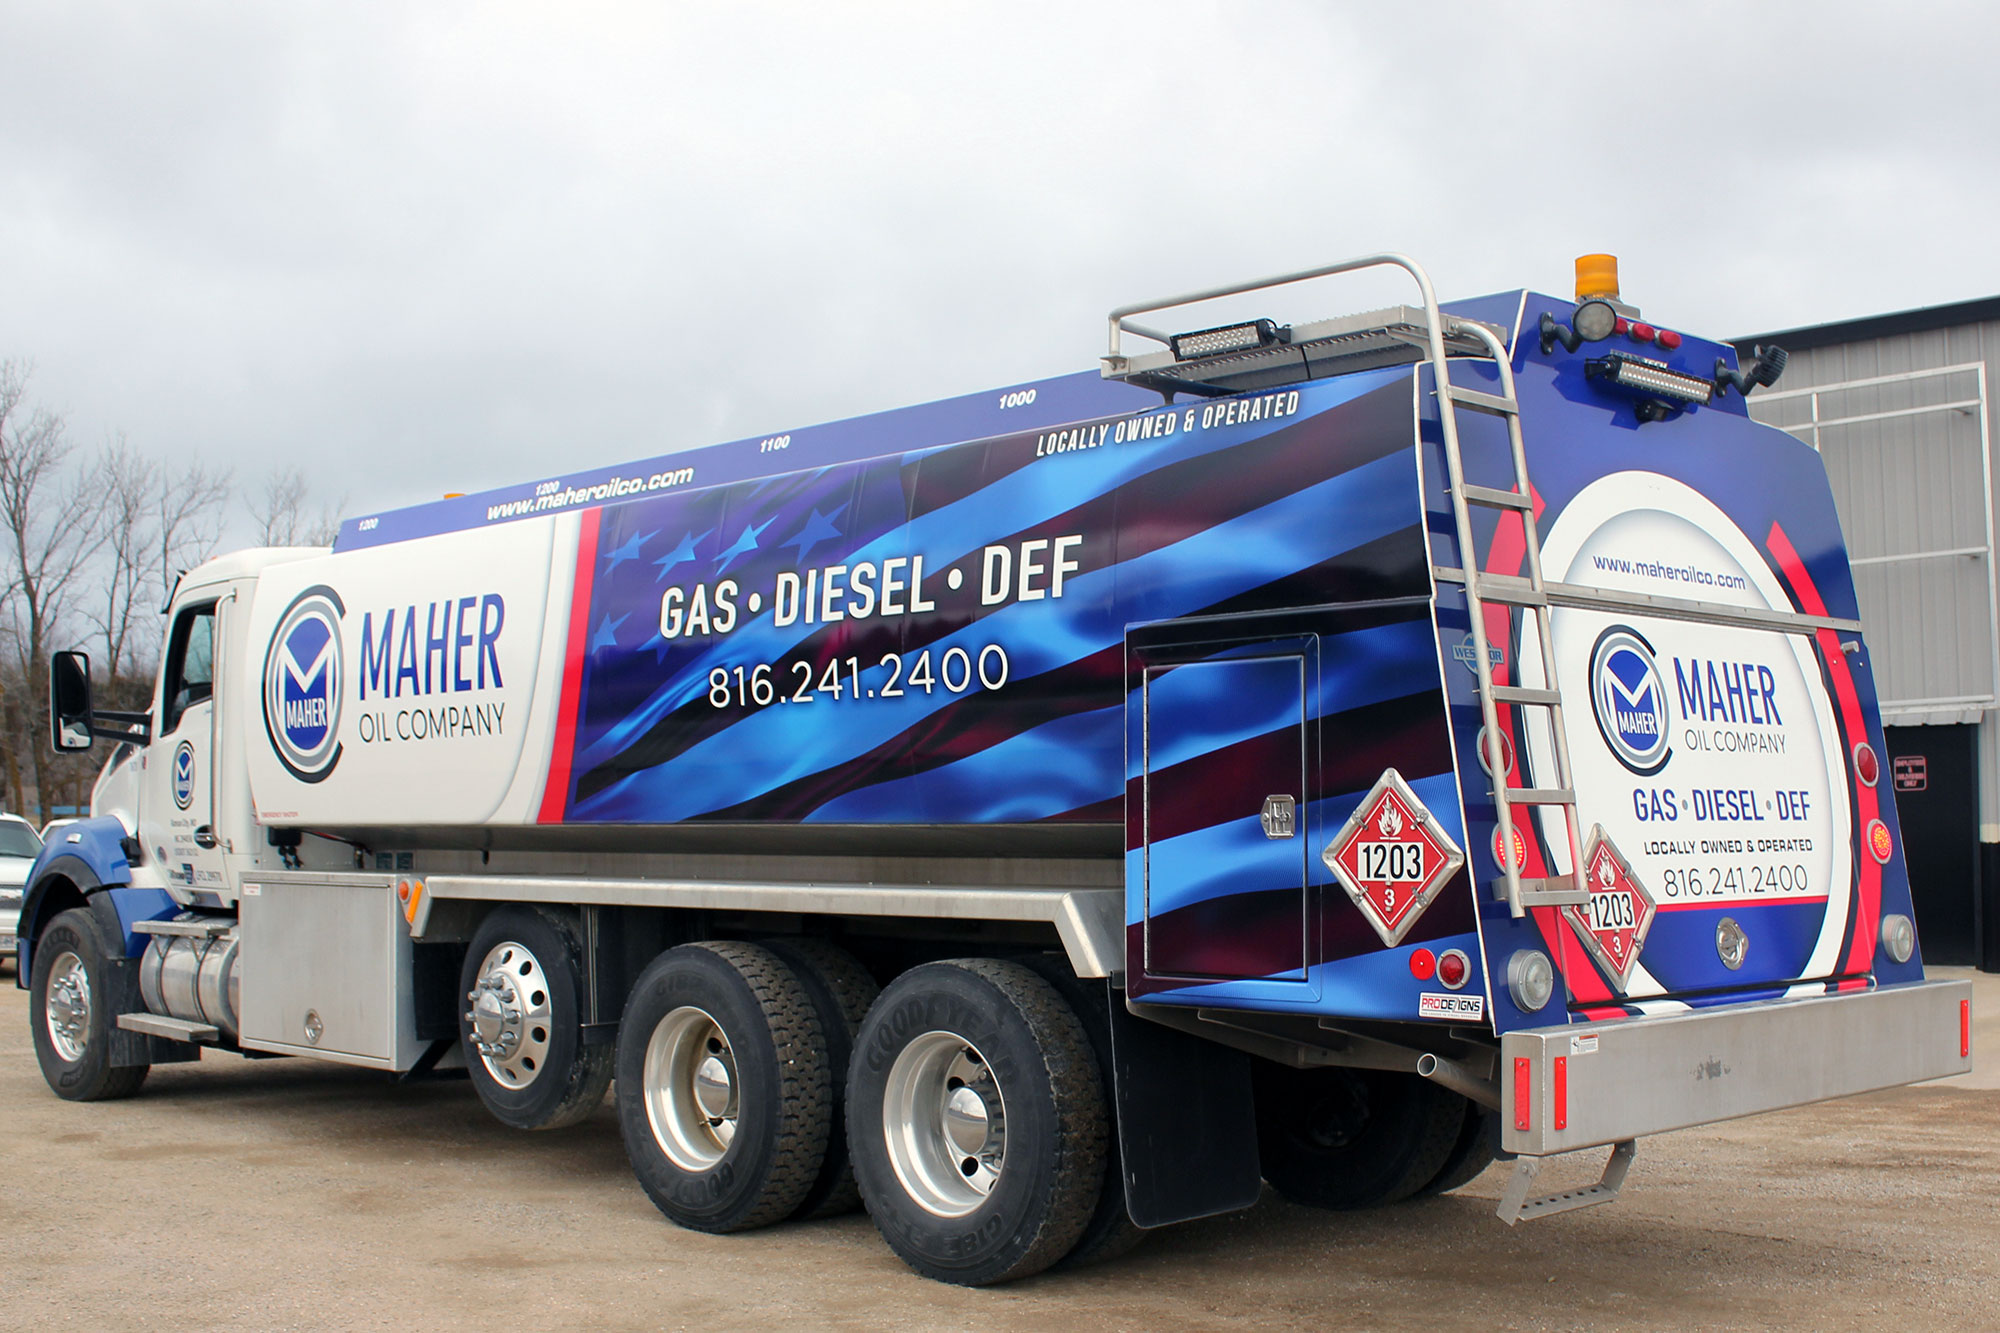 Maher Oil Company Tanker Wraps Store Fronts Windows Outdoor Pro Dezigns Columbia Mo